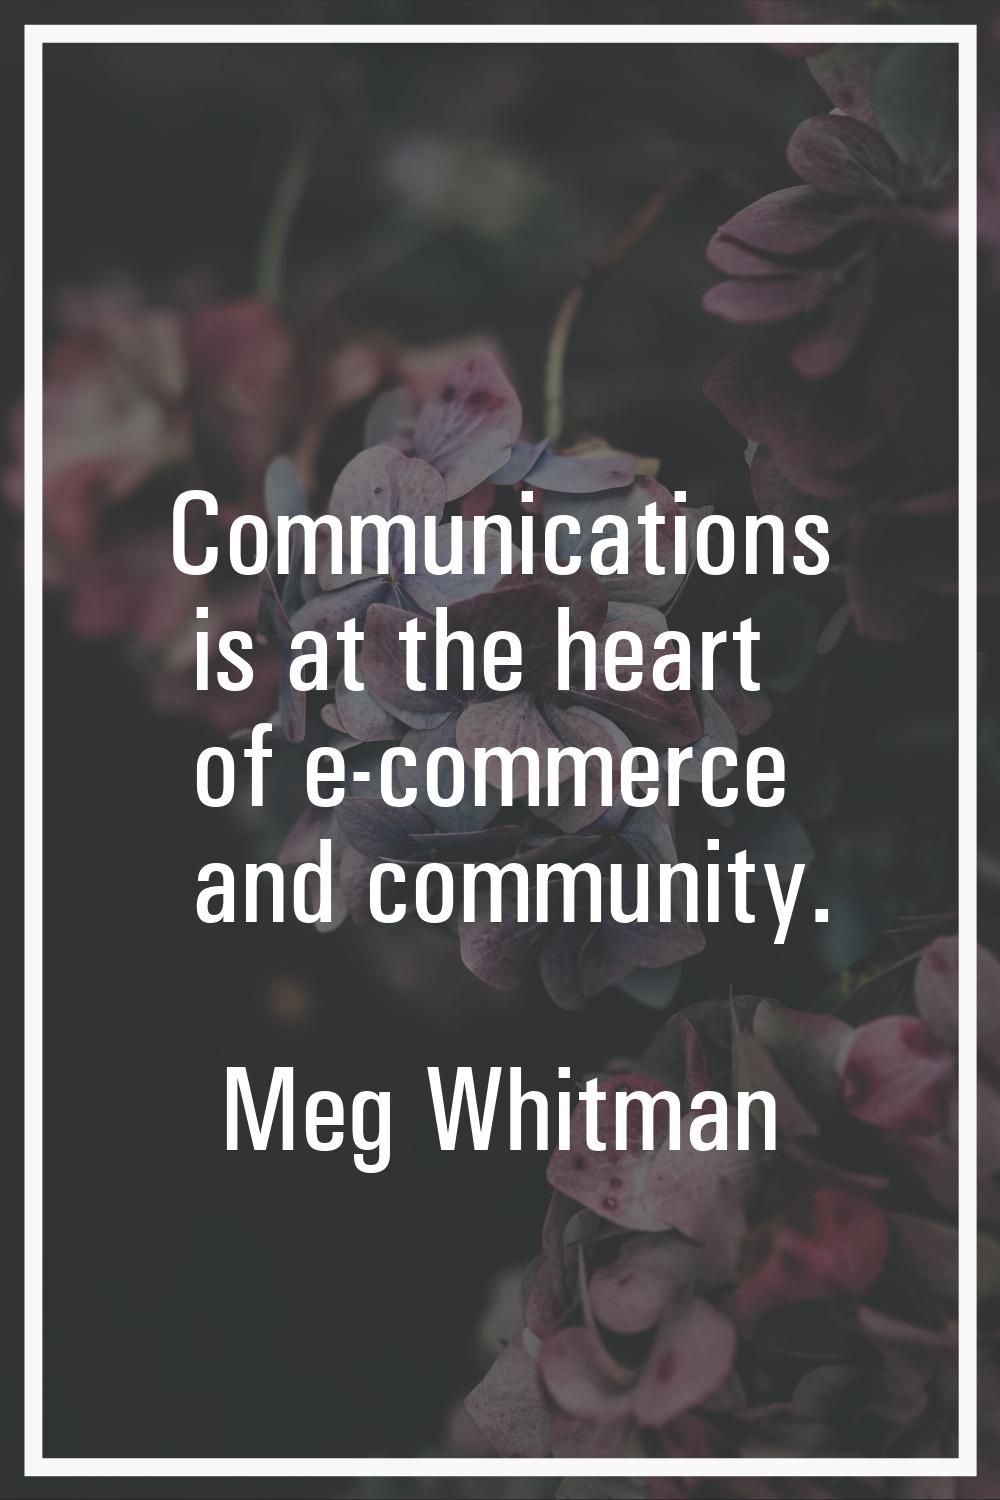 Communications is at the heart of e-commerce and community.